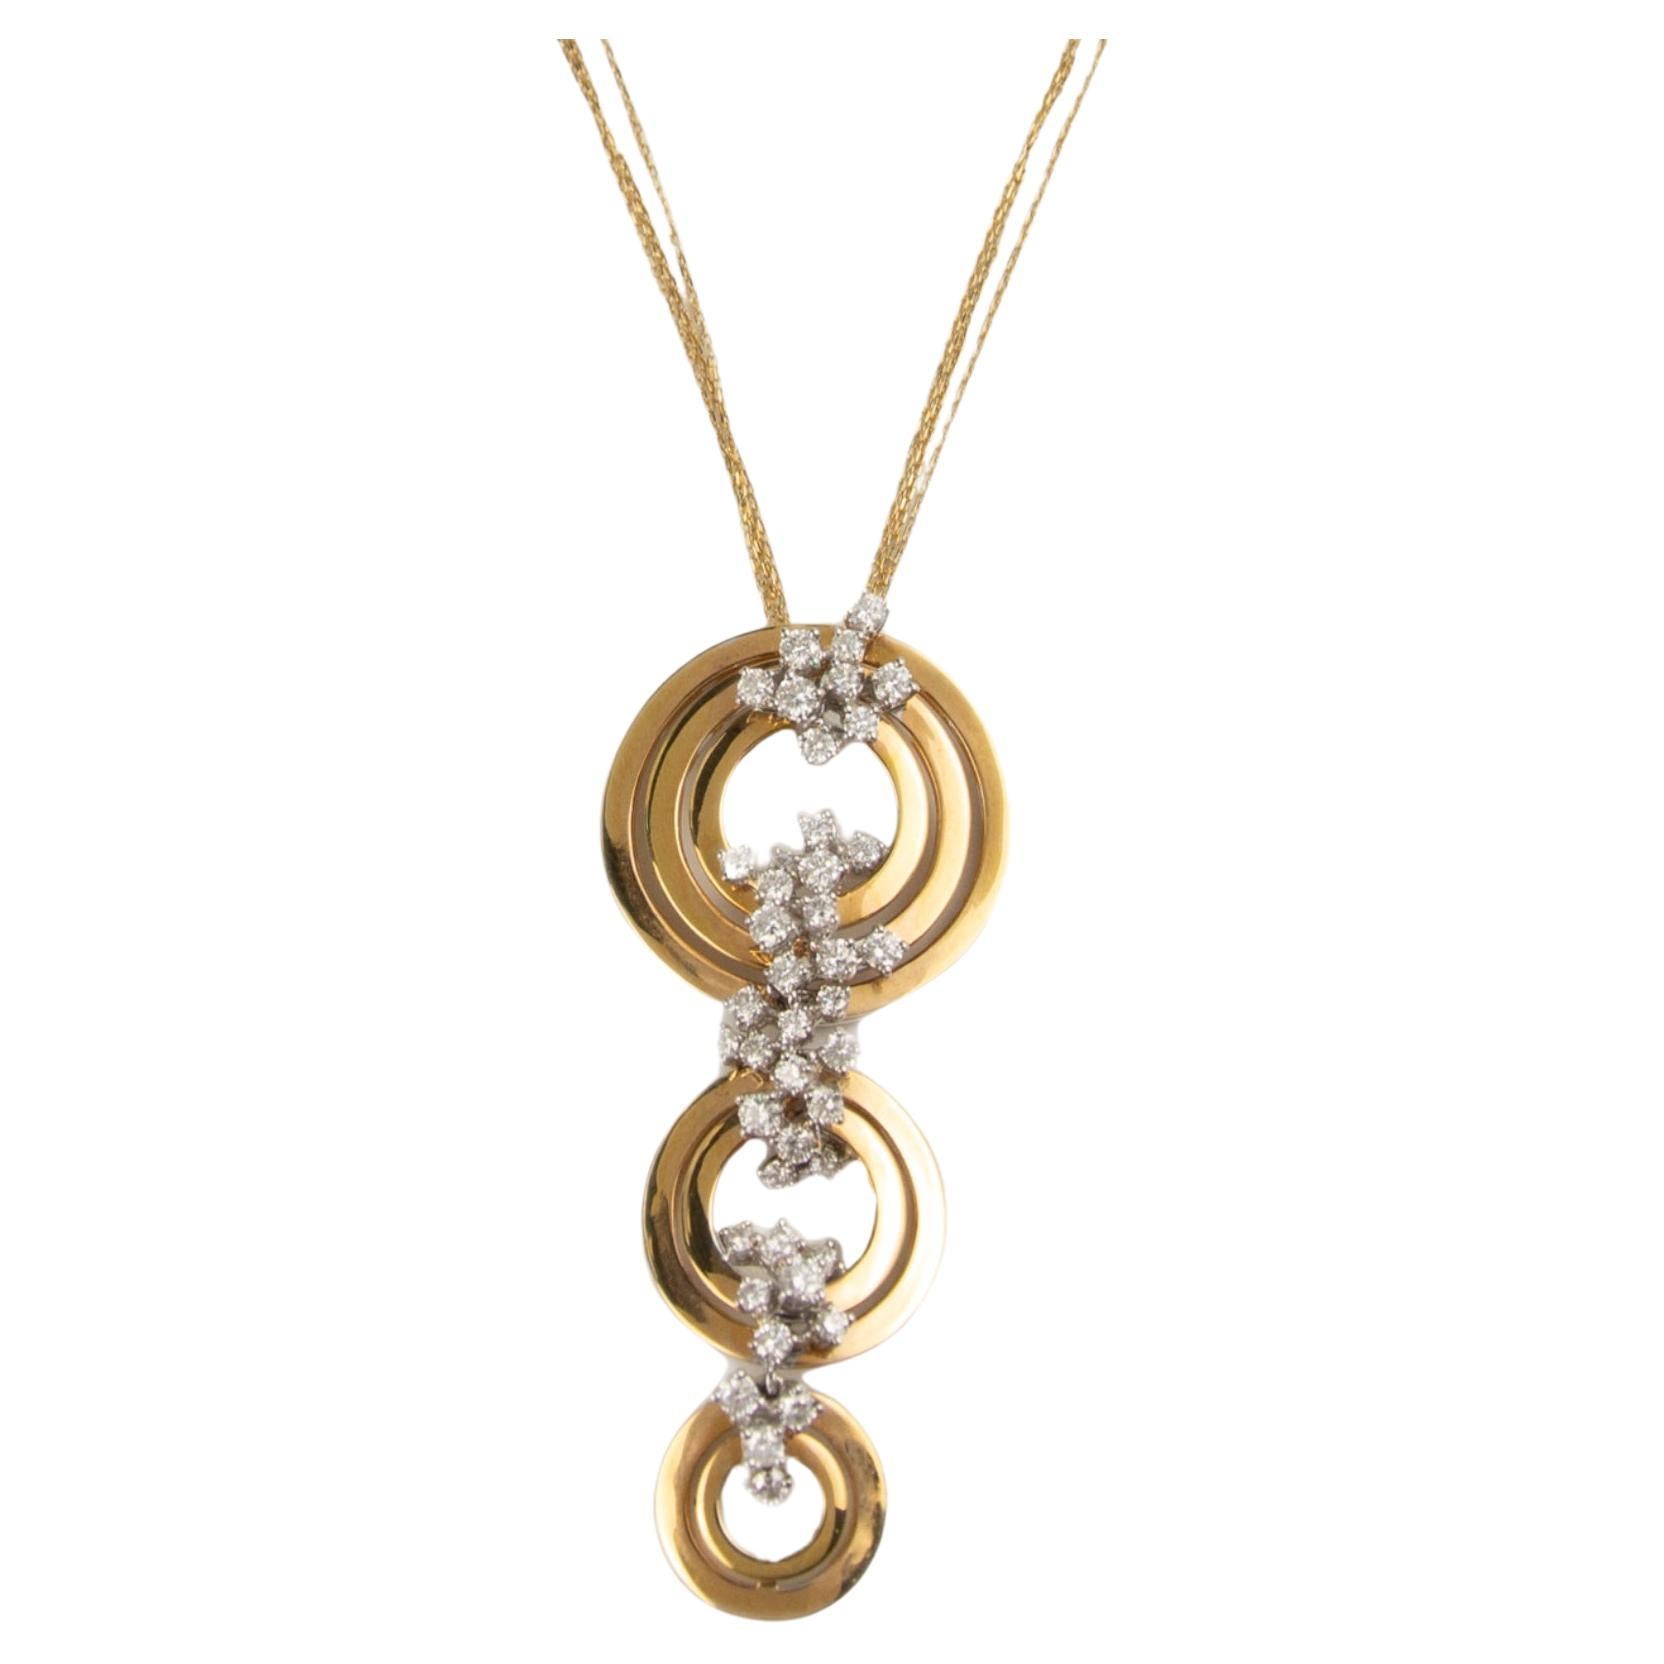 Collier Damiani
Collection'S Collectional
Or rose 18K
Diamants : 2.32ctw